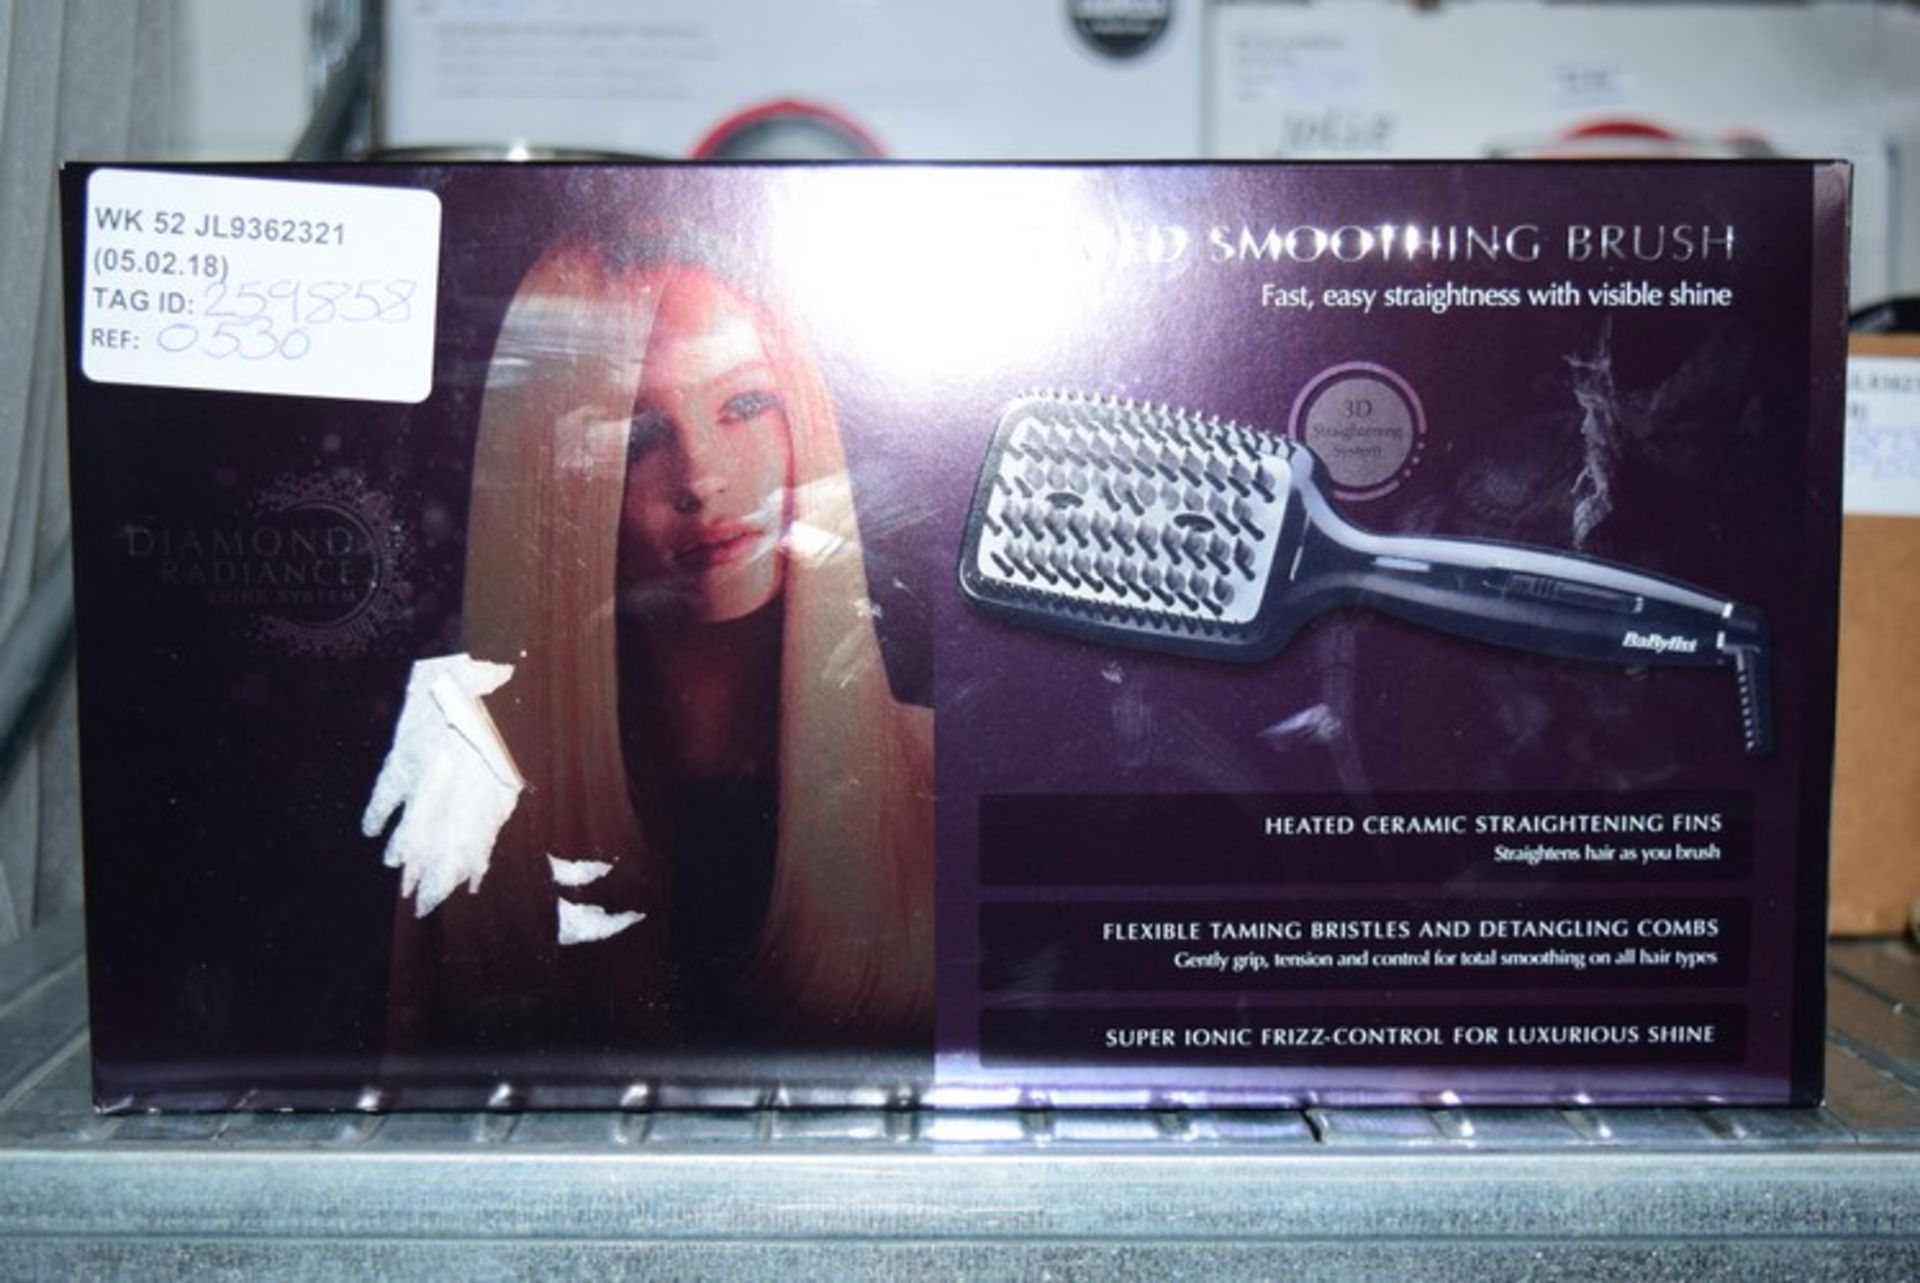 1 x BOXED BABYLISS HEATED SMOOTHING BRUSH RRP £55 05.02.17 259858 *PLEASE NOTE THAT THE BID PRICE IS